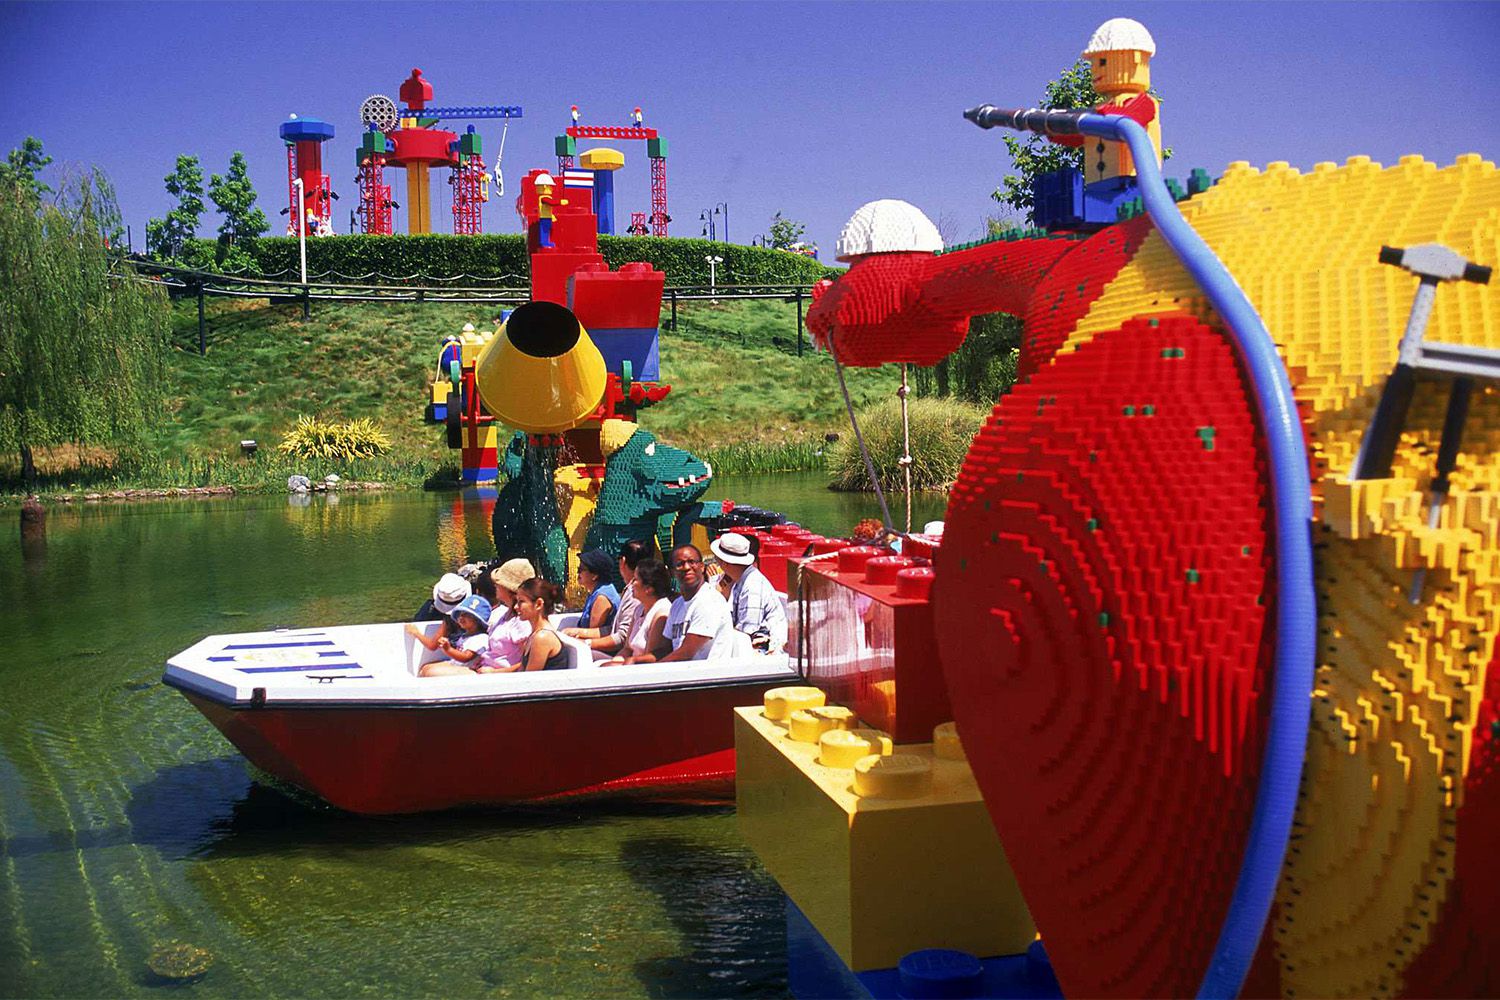 Legoland California - What You Need to Know Before You Go